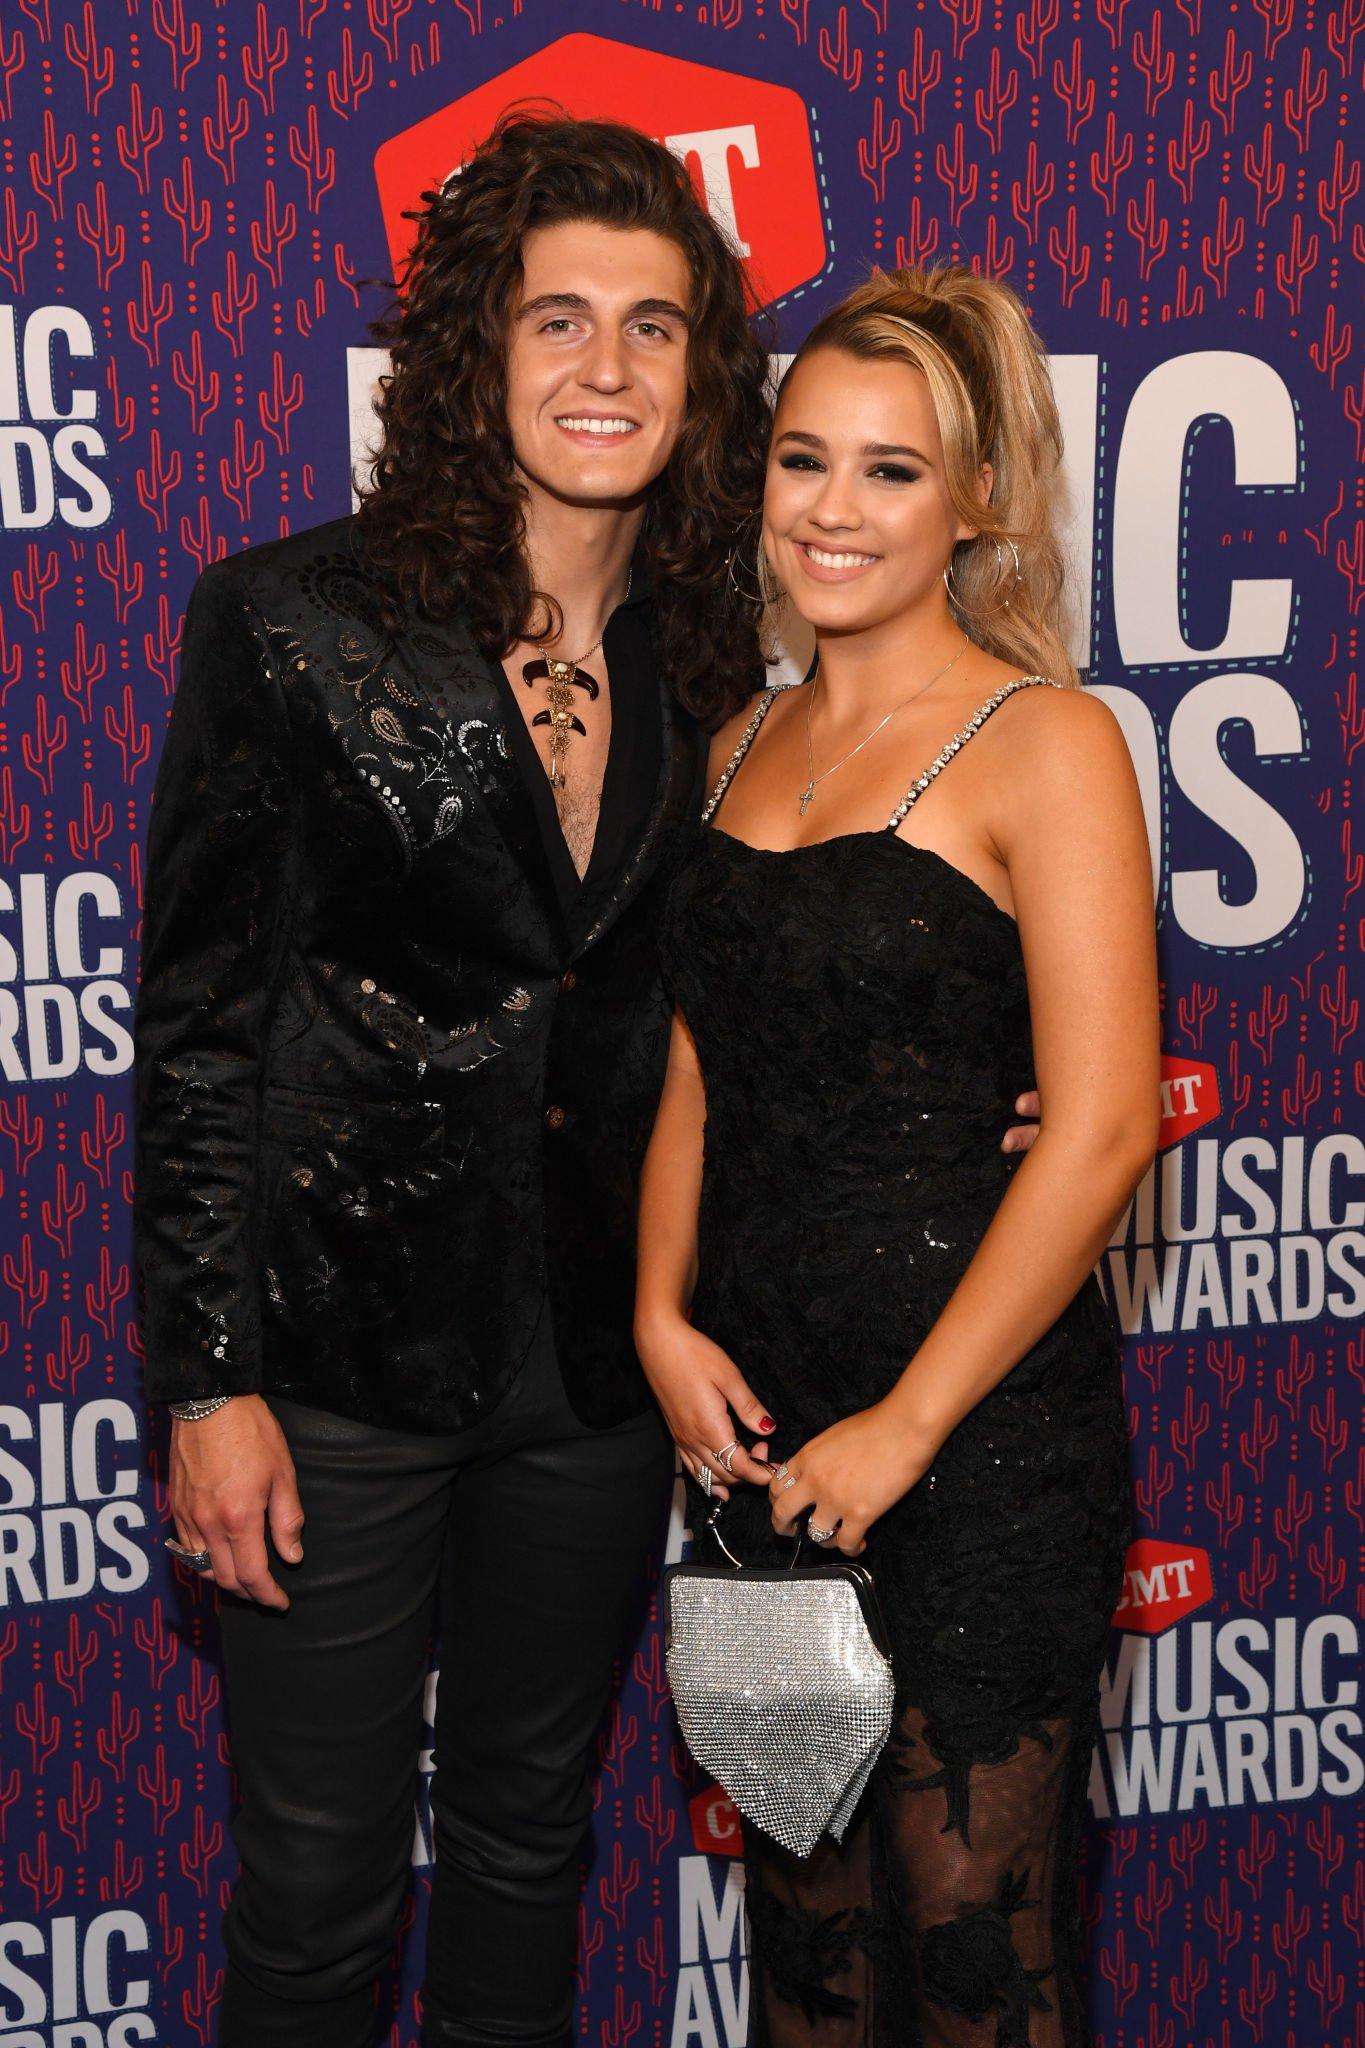 Gabby Barrett and Cade Foehner at the CMT Music Awards on June 5, 2019.
